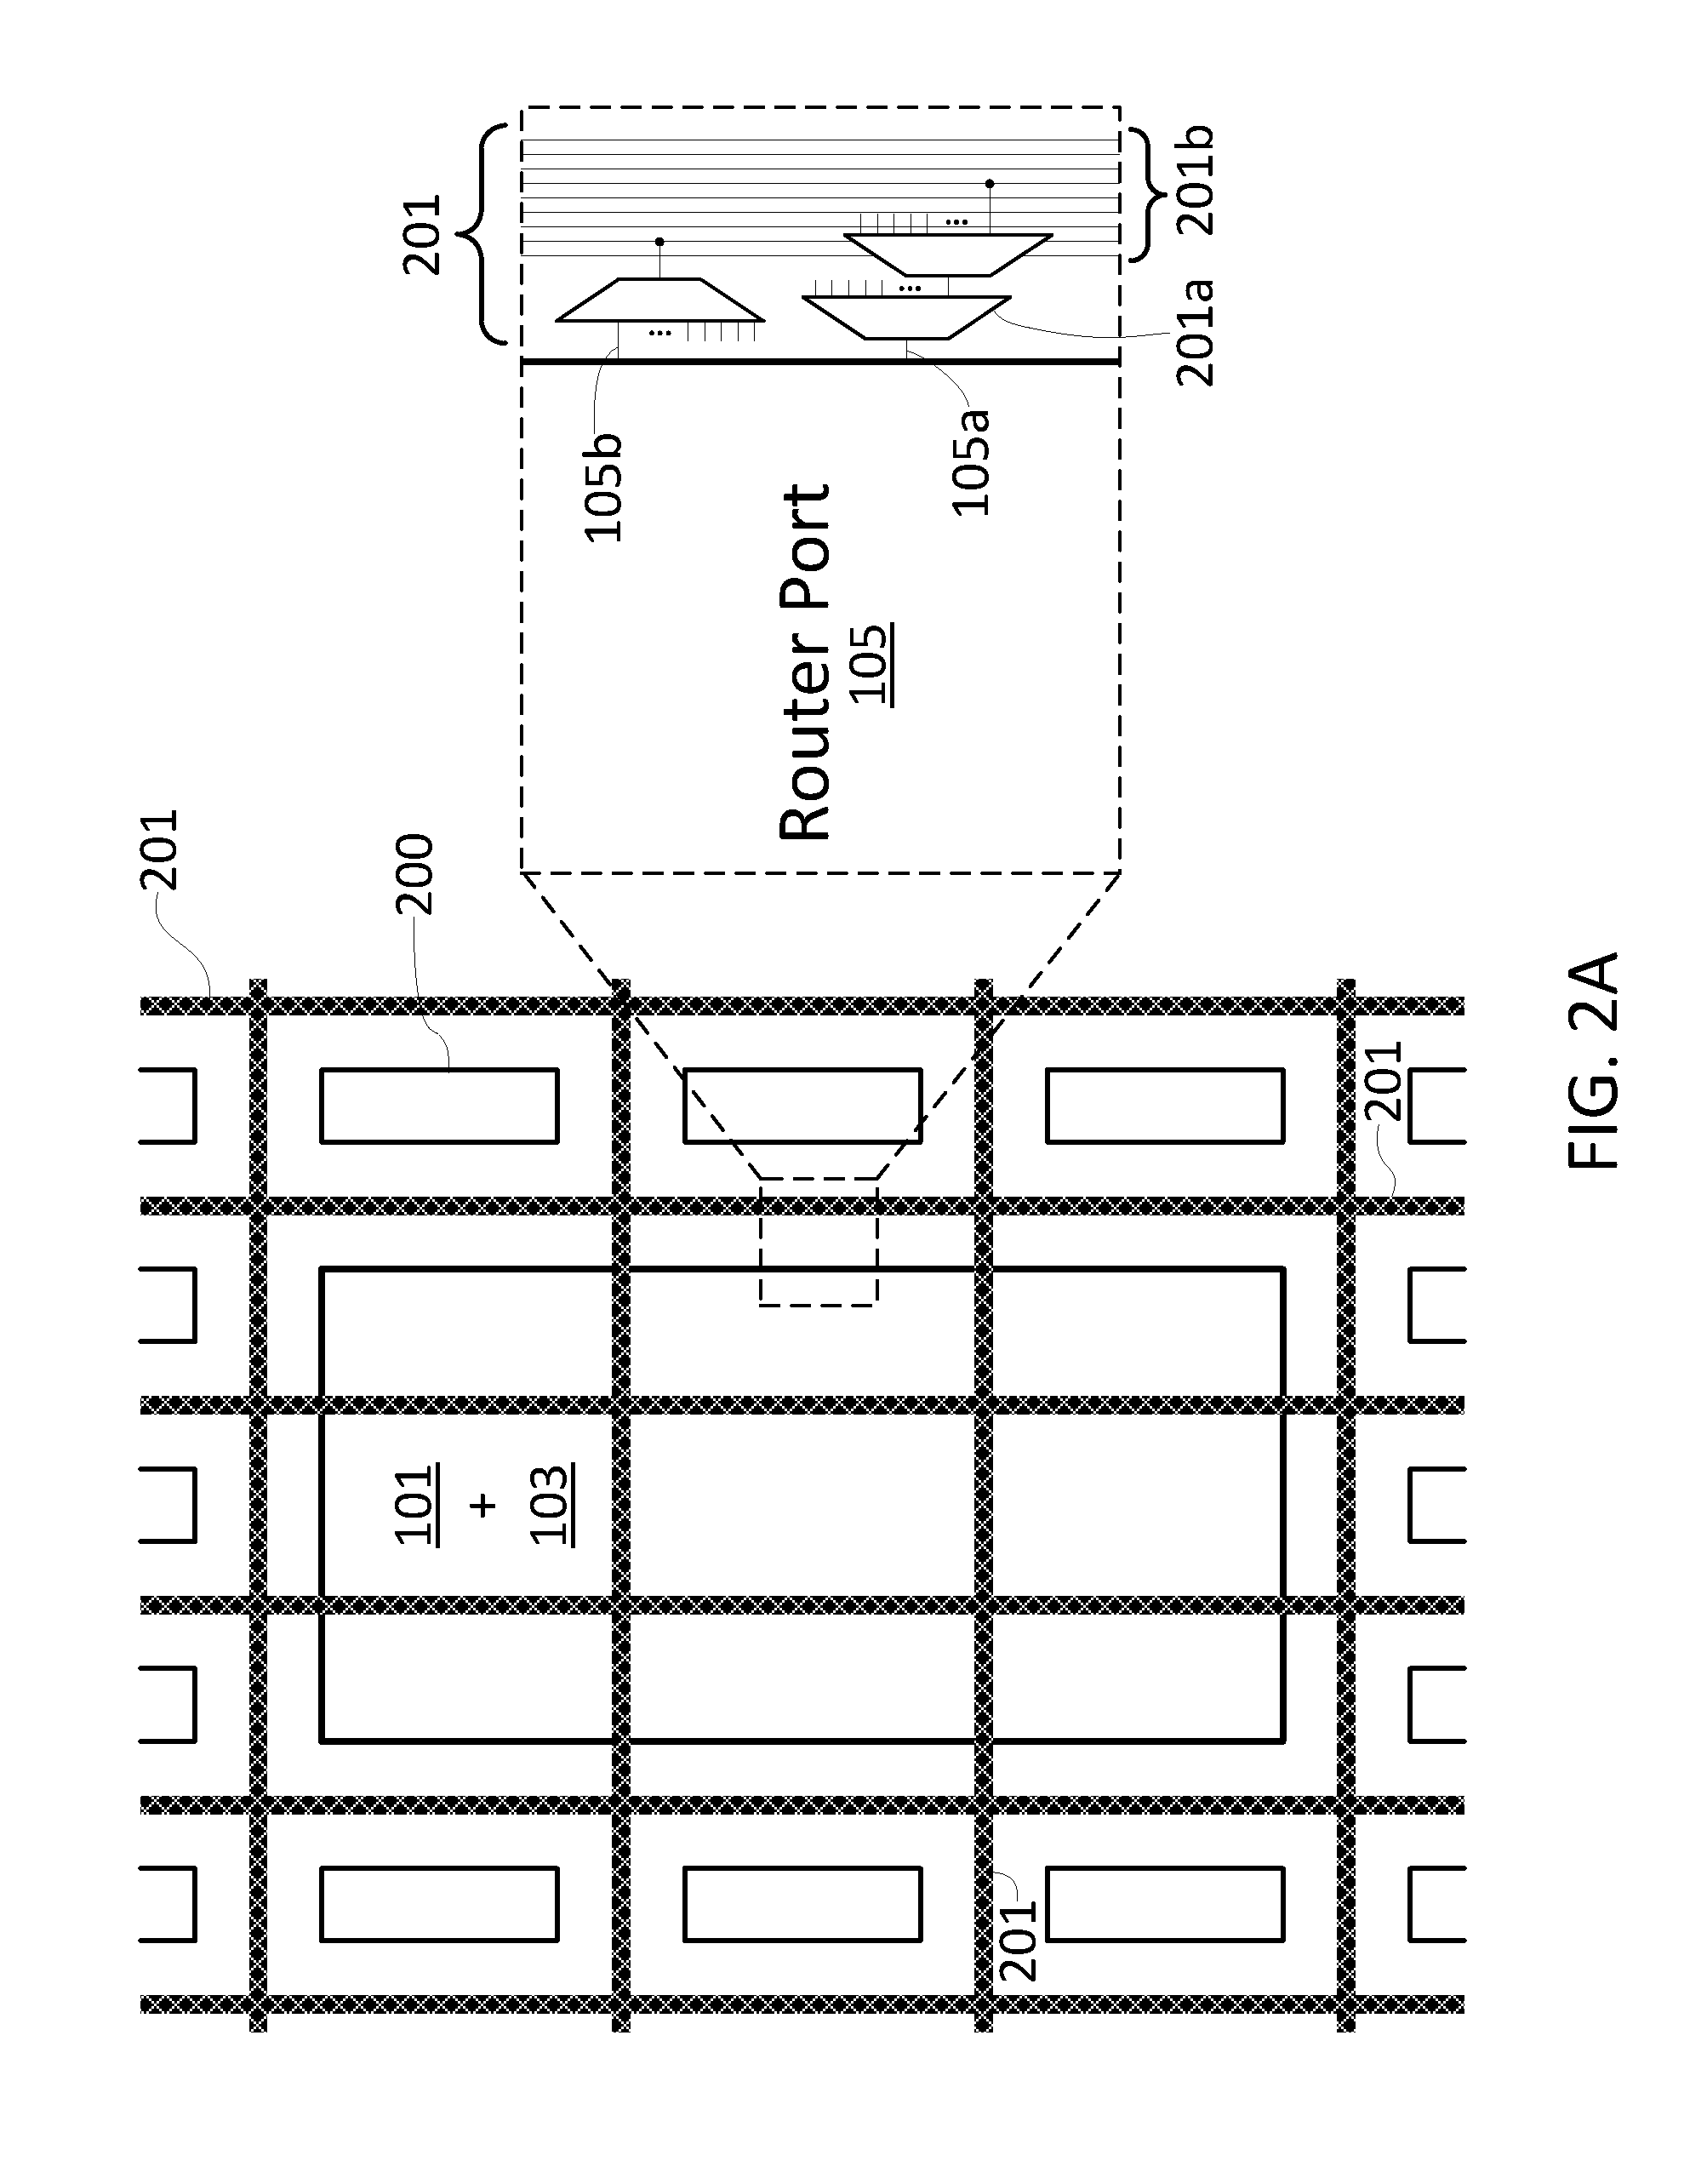 Field Programmable Gate-Array with Embedded Network-on-Chip Hardware and Design Flow